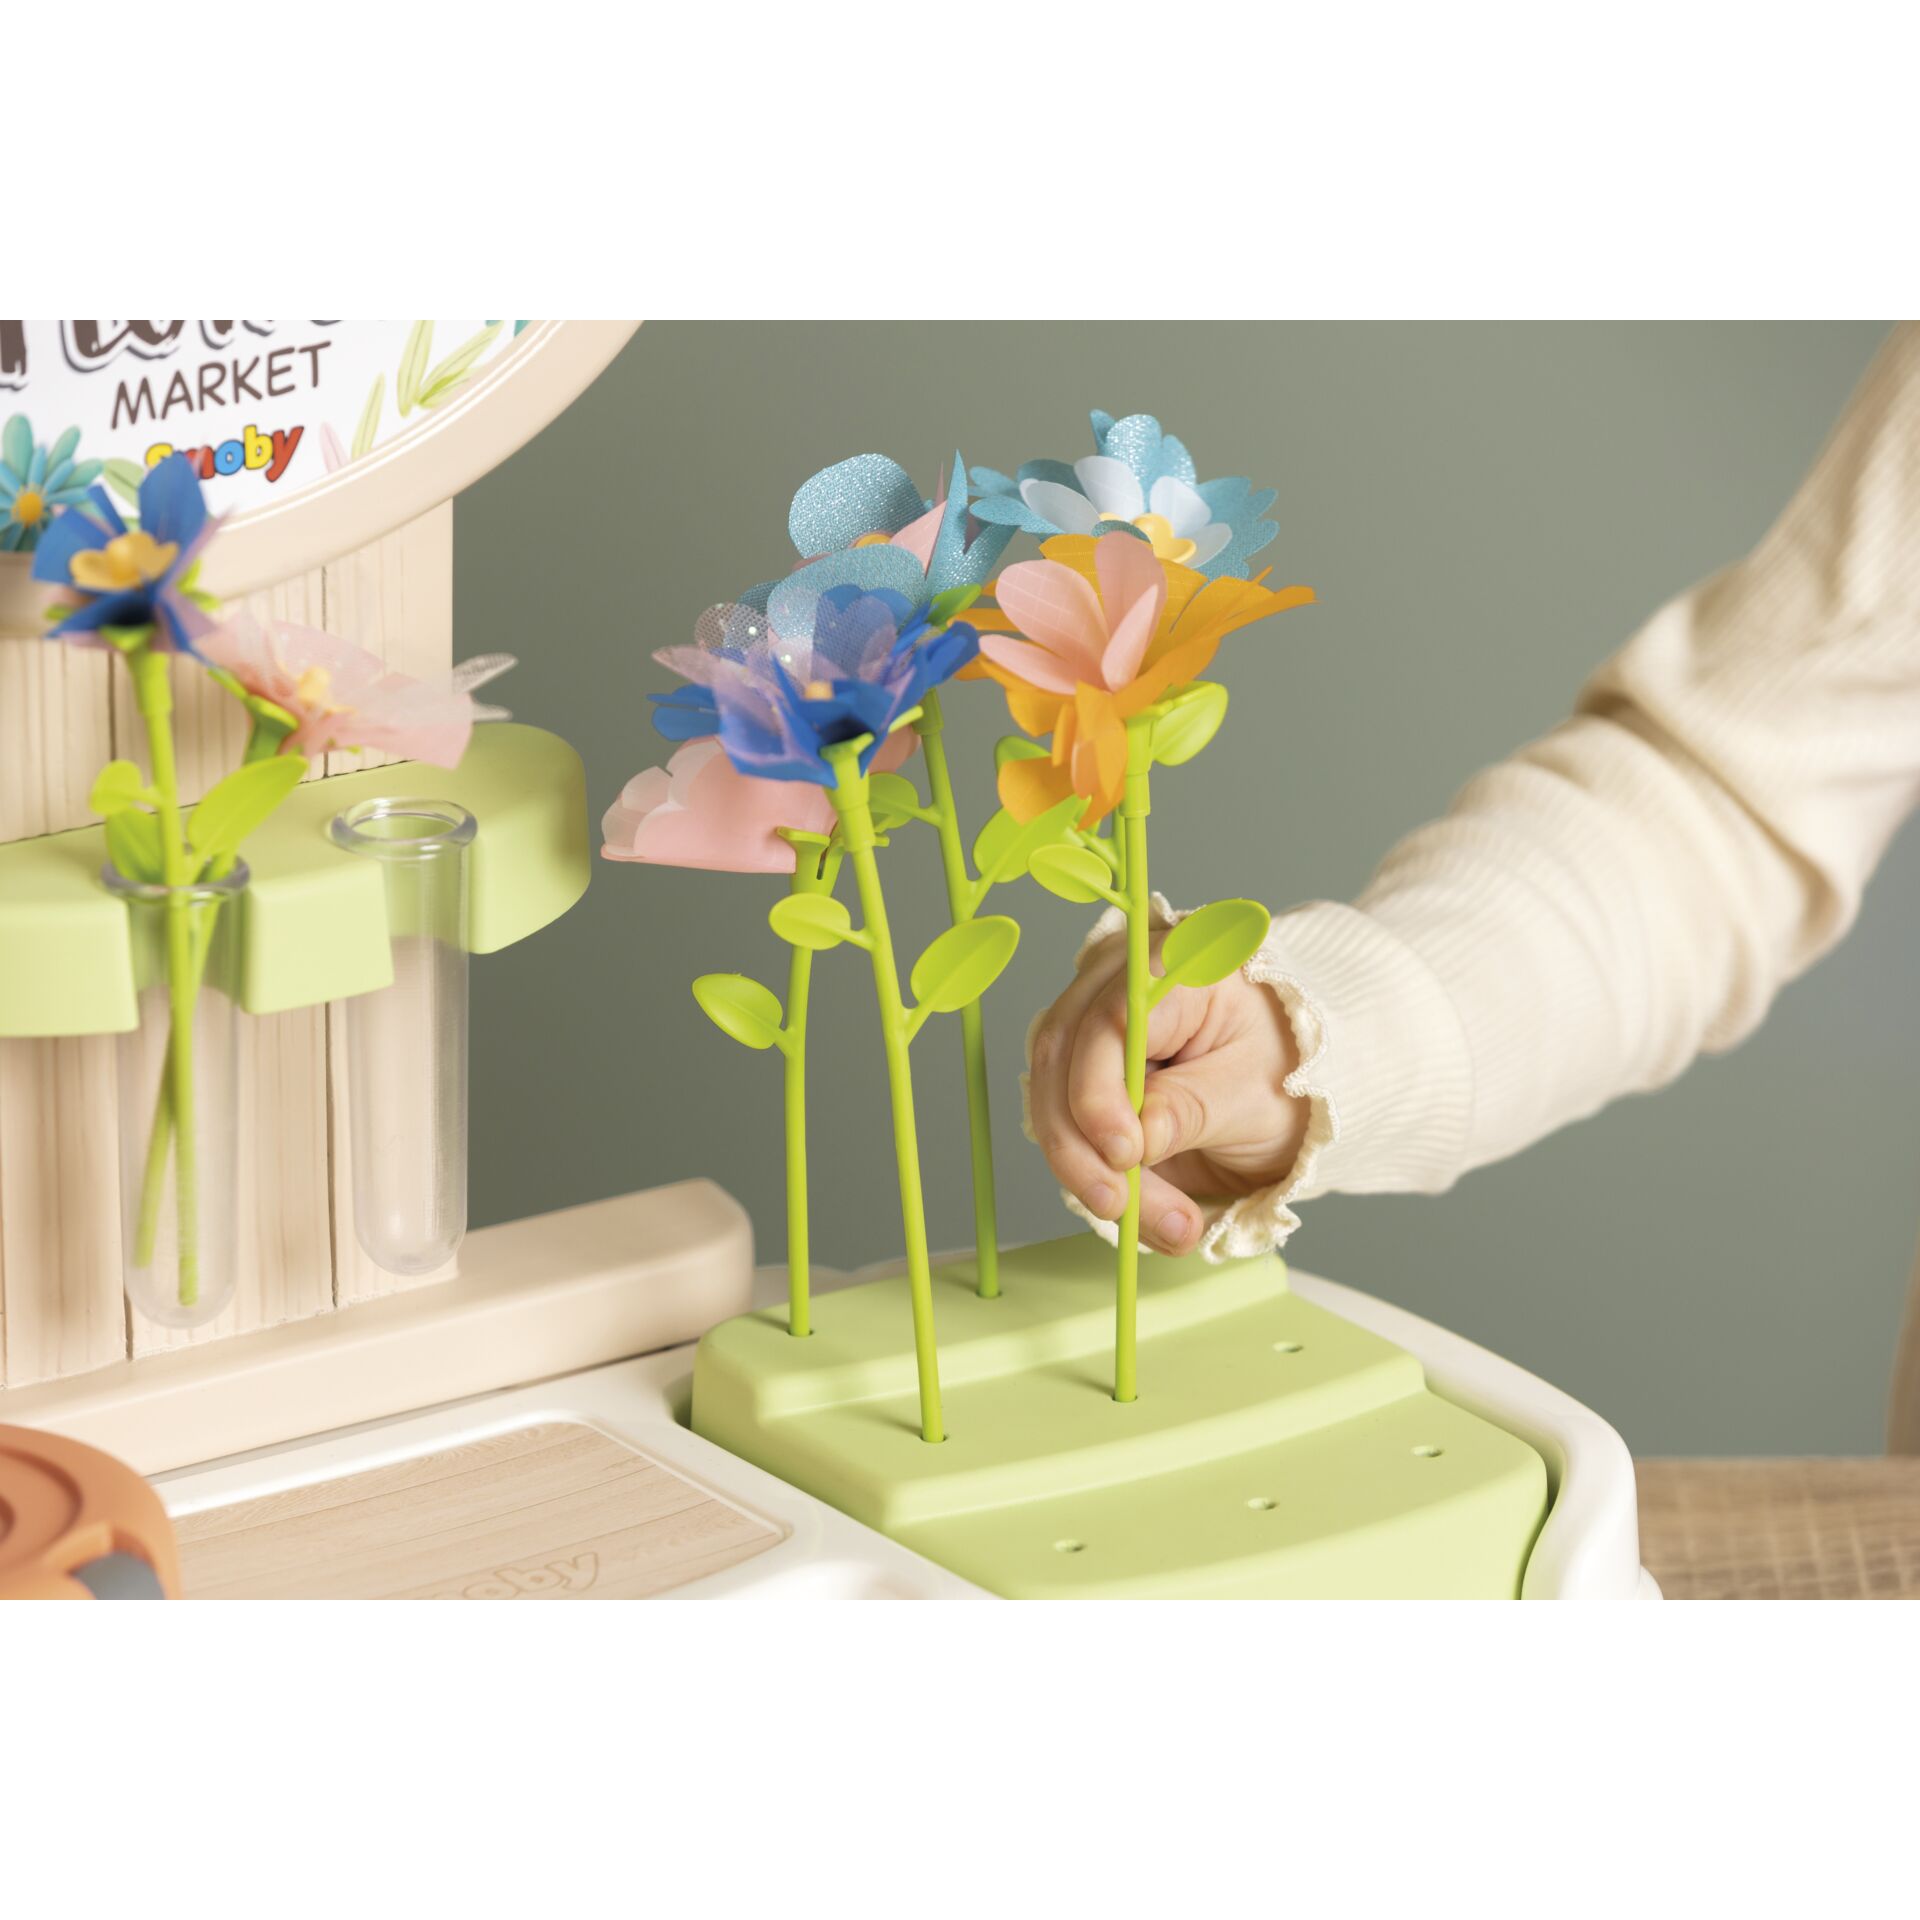 Special Smoby Flower Market-Each —